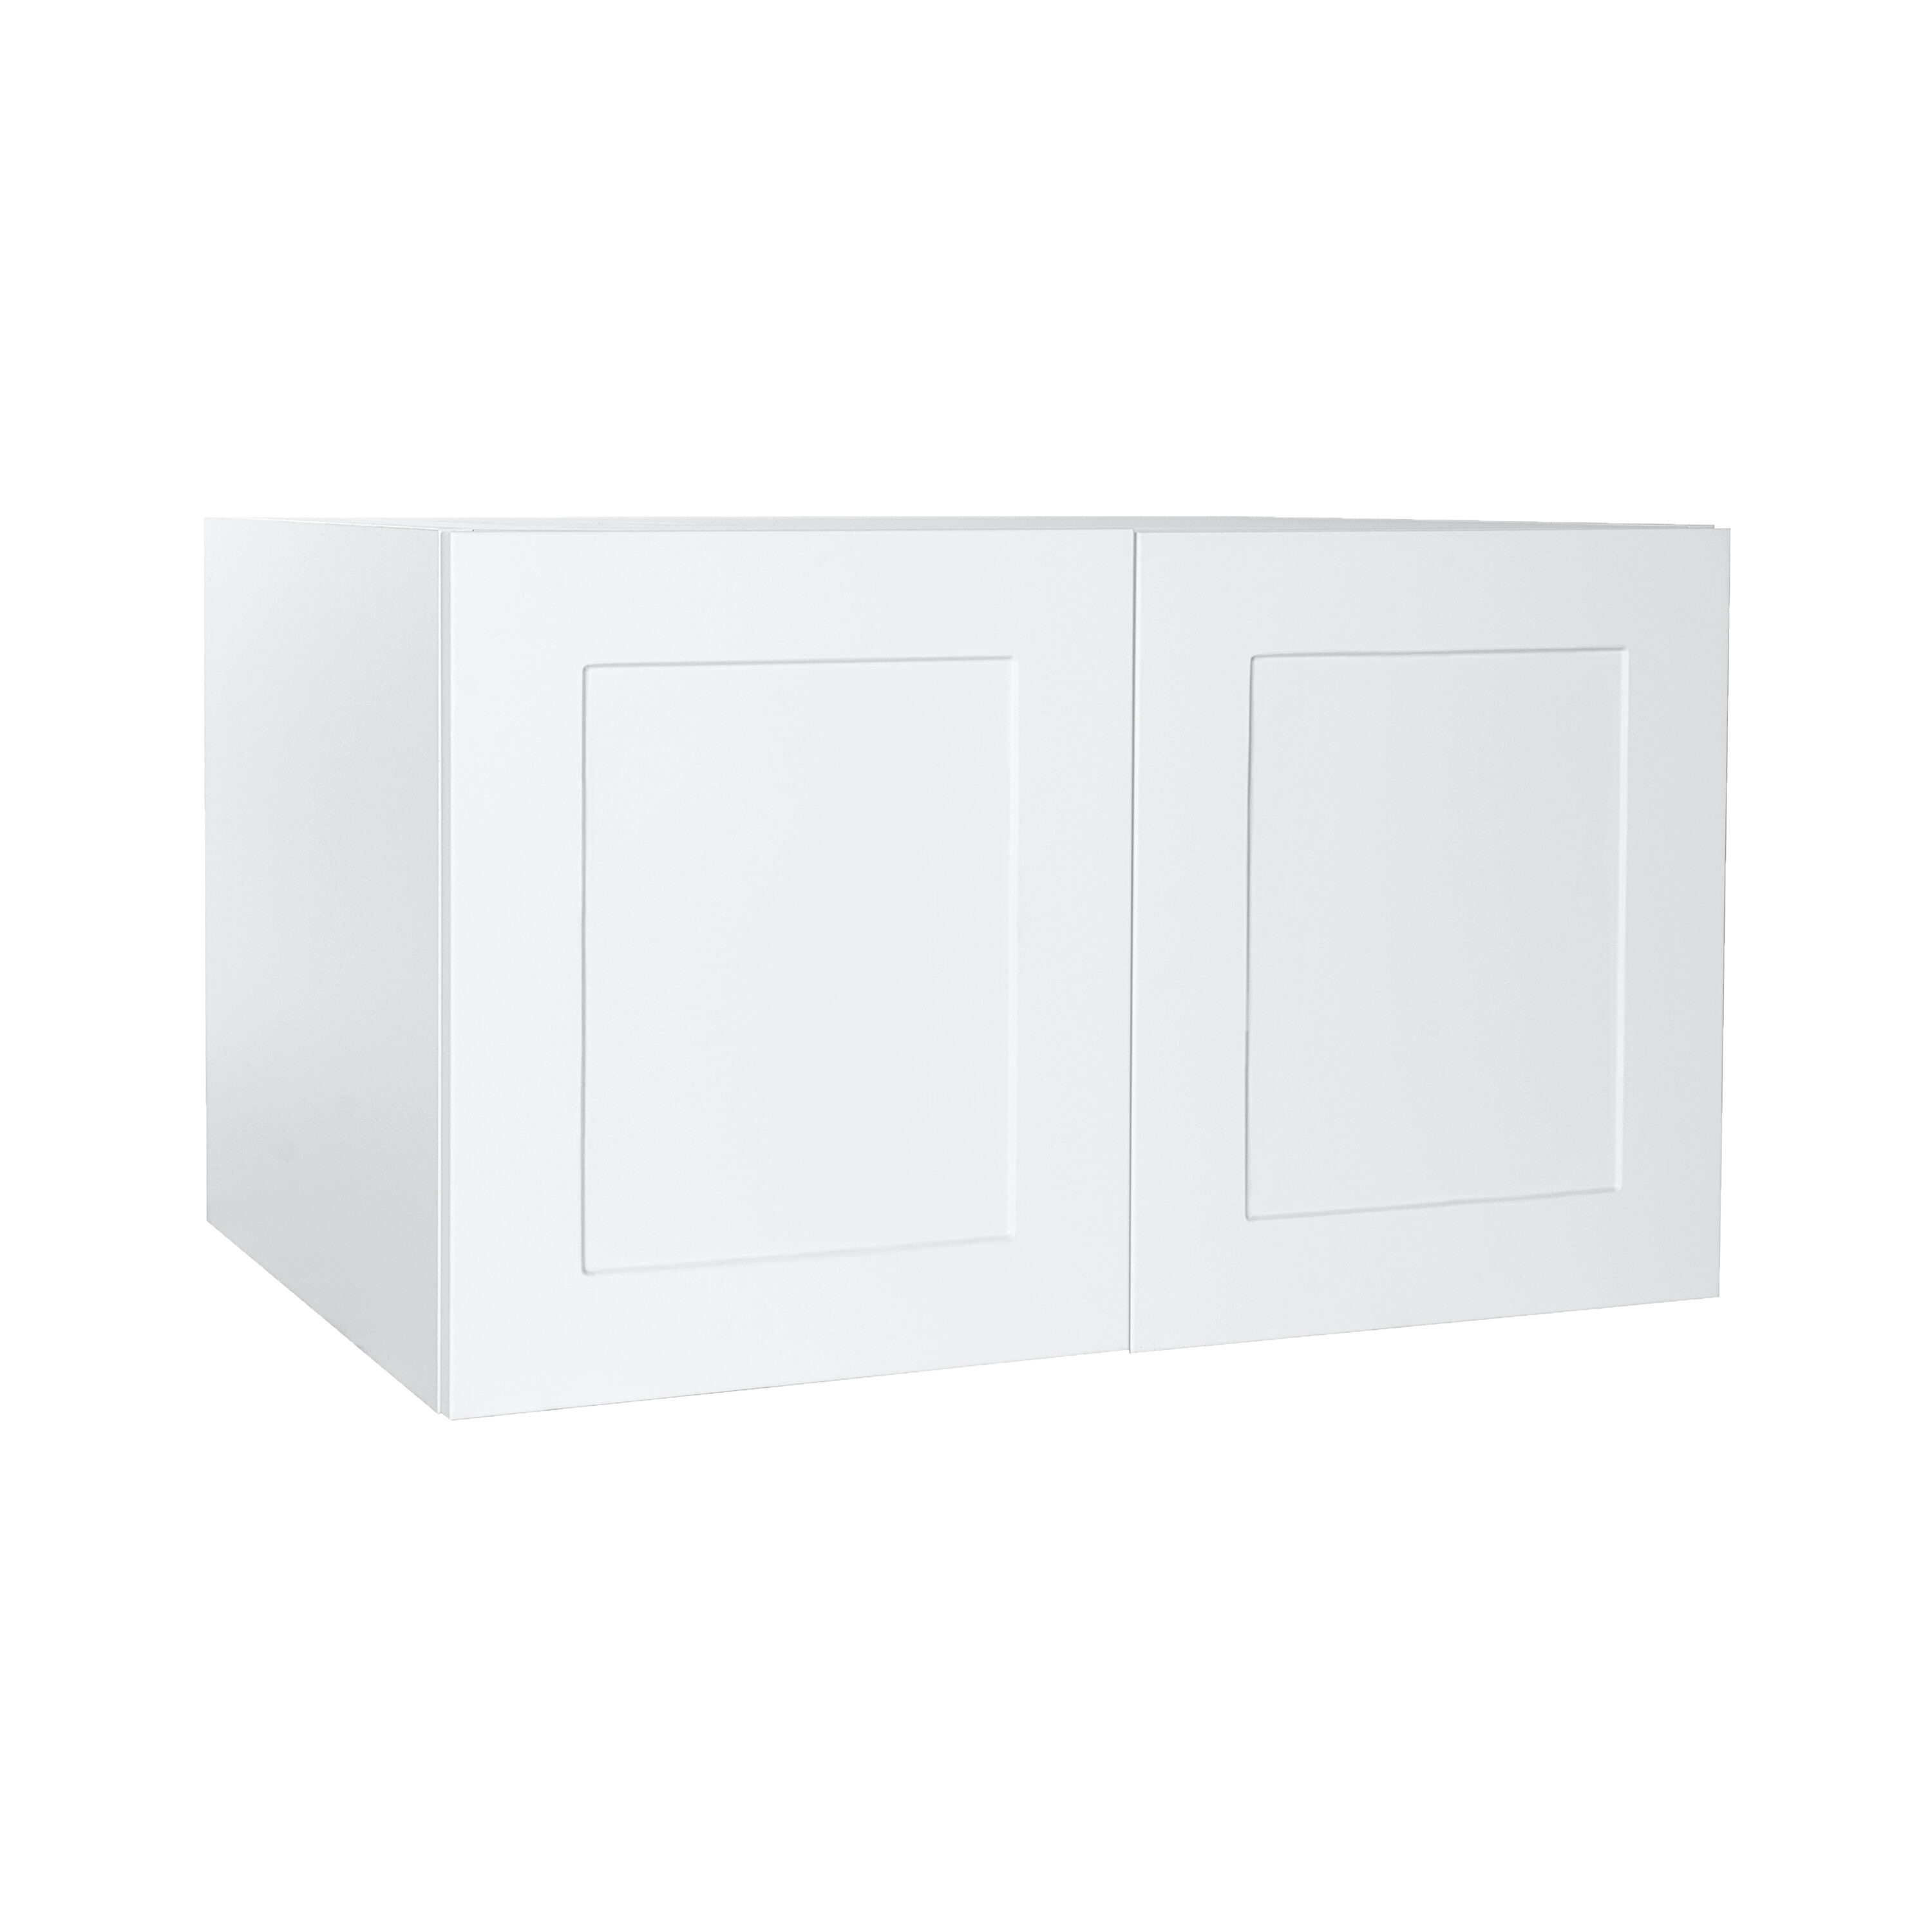 24 x 36 x 13 Two-door wall kitchen cabinet with microwave storage